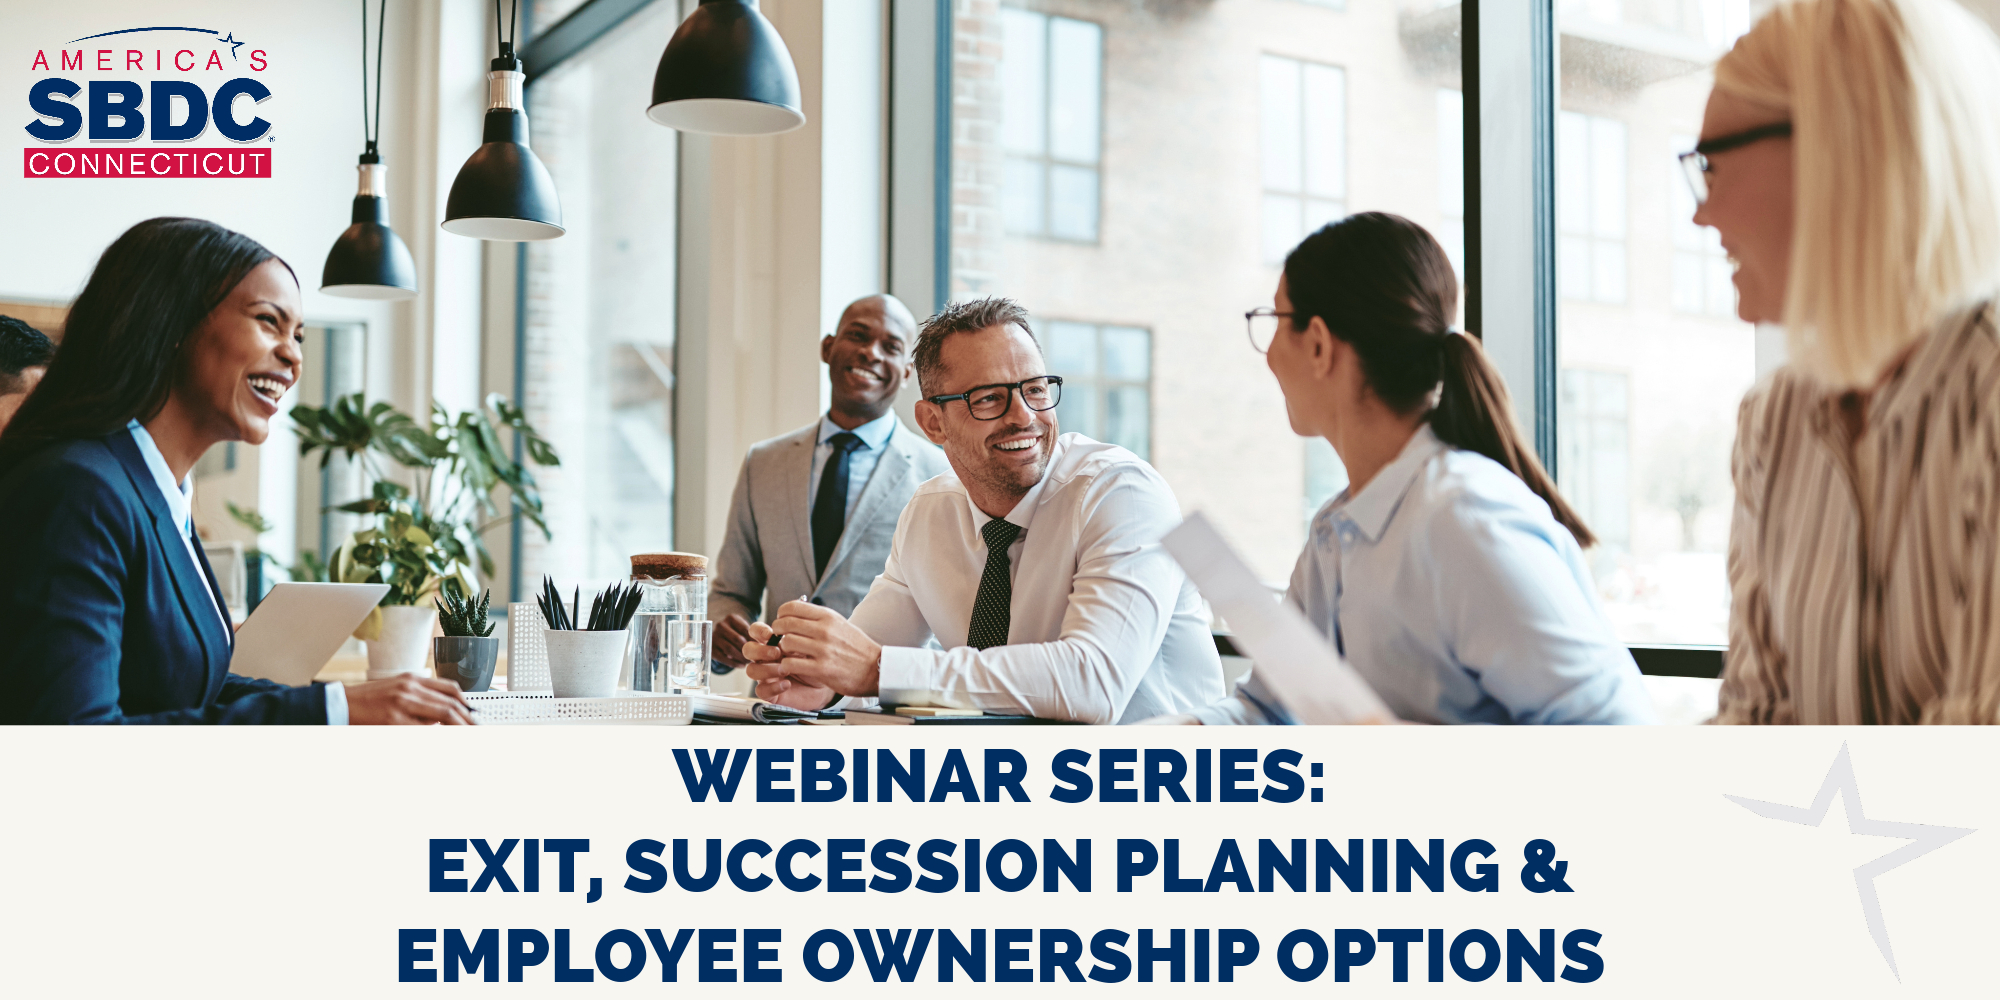 Webinar Series: Exit, Succession Planning, and Employee Ownership Options